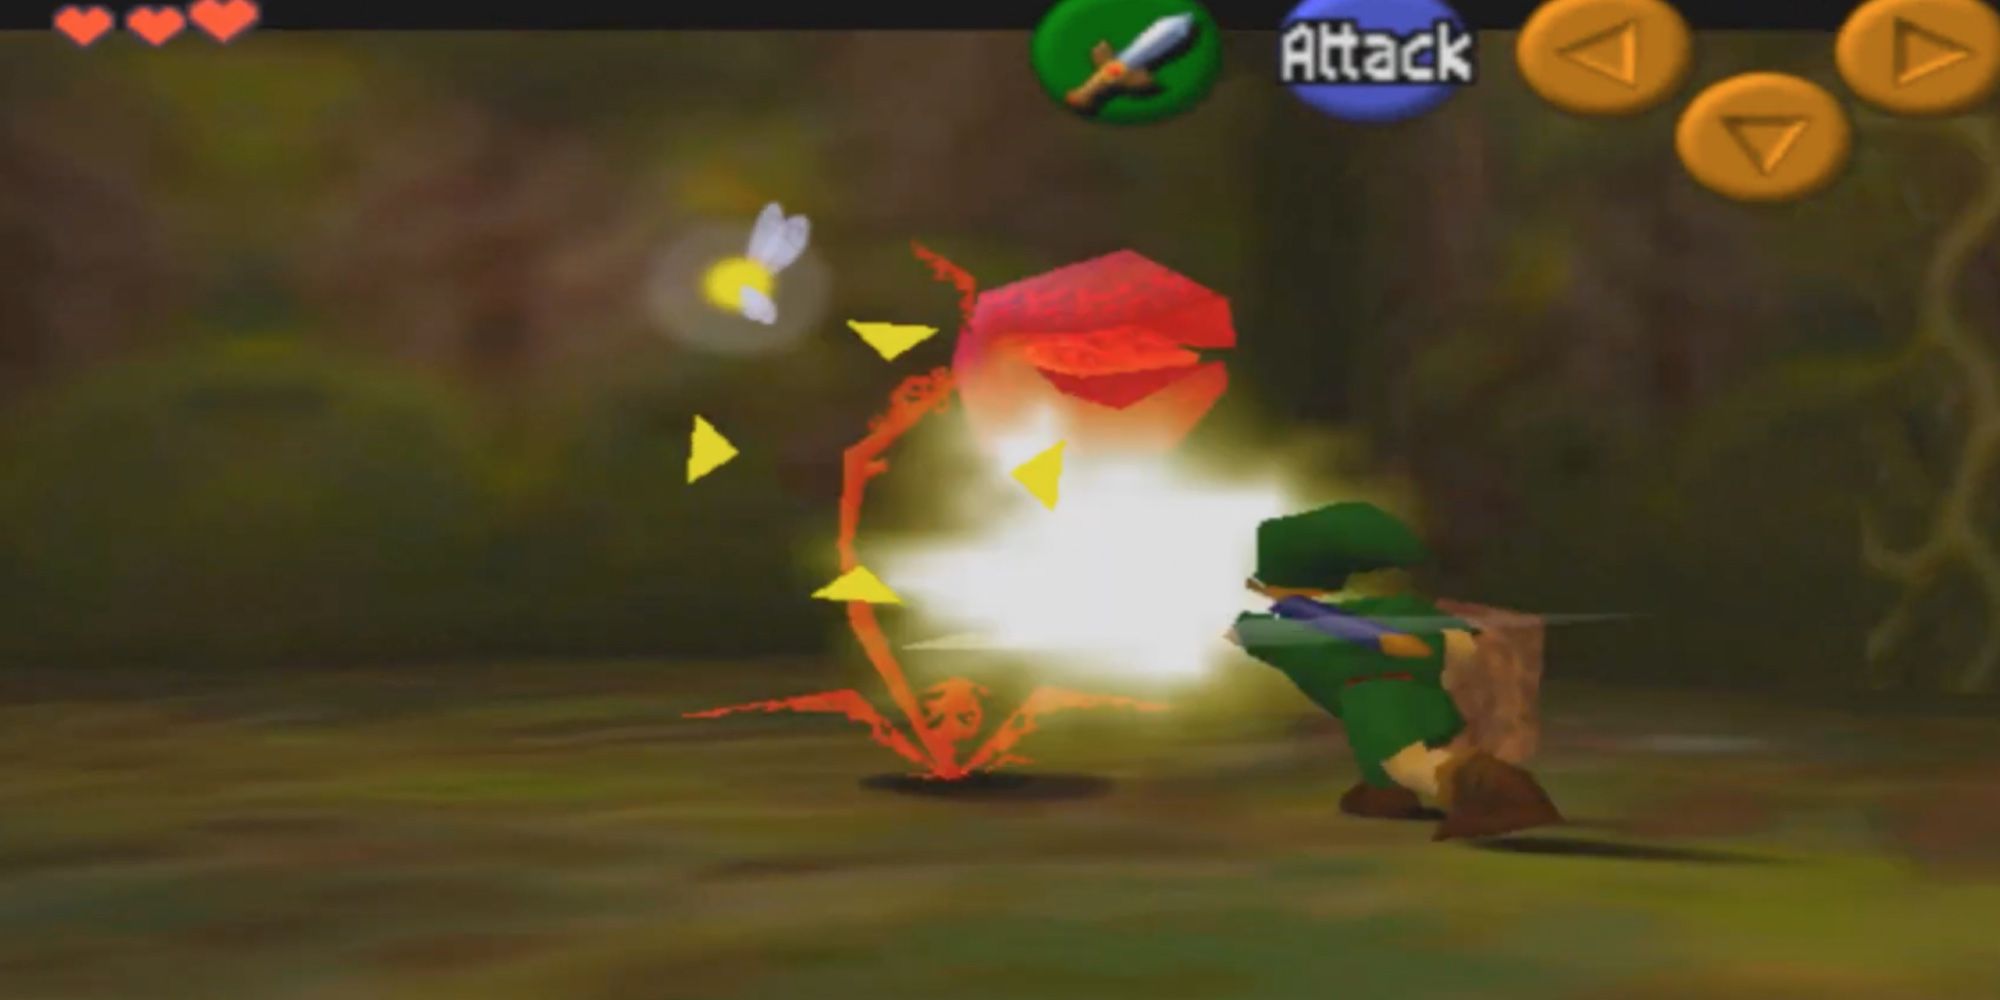 Legend of Zelda - Ocarina of Time - Link fighting with three hearts